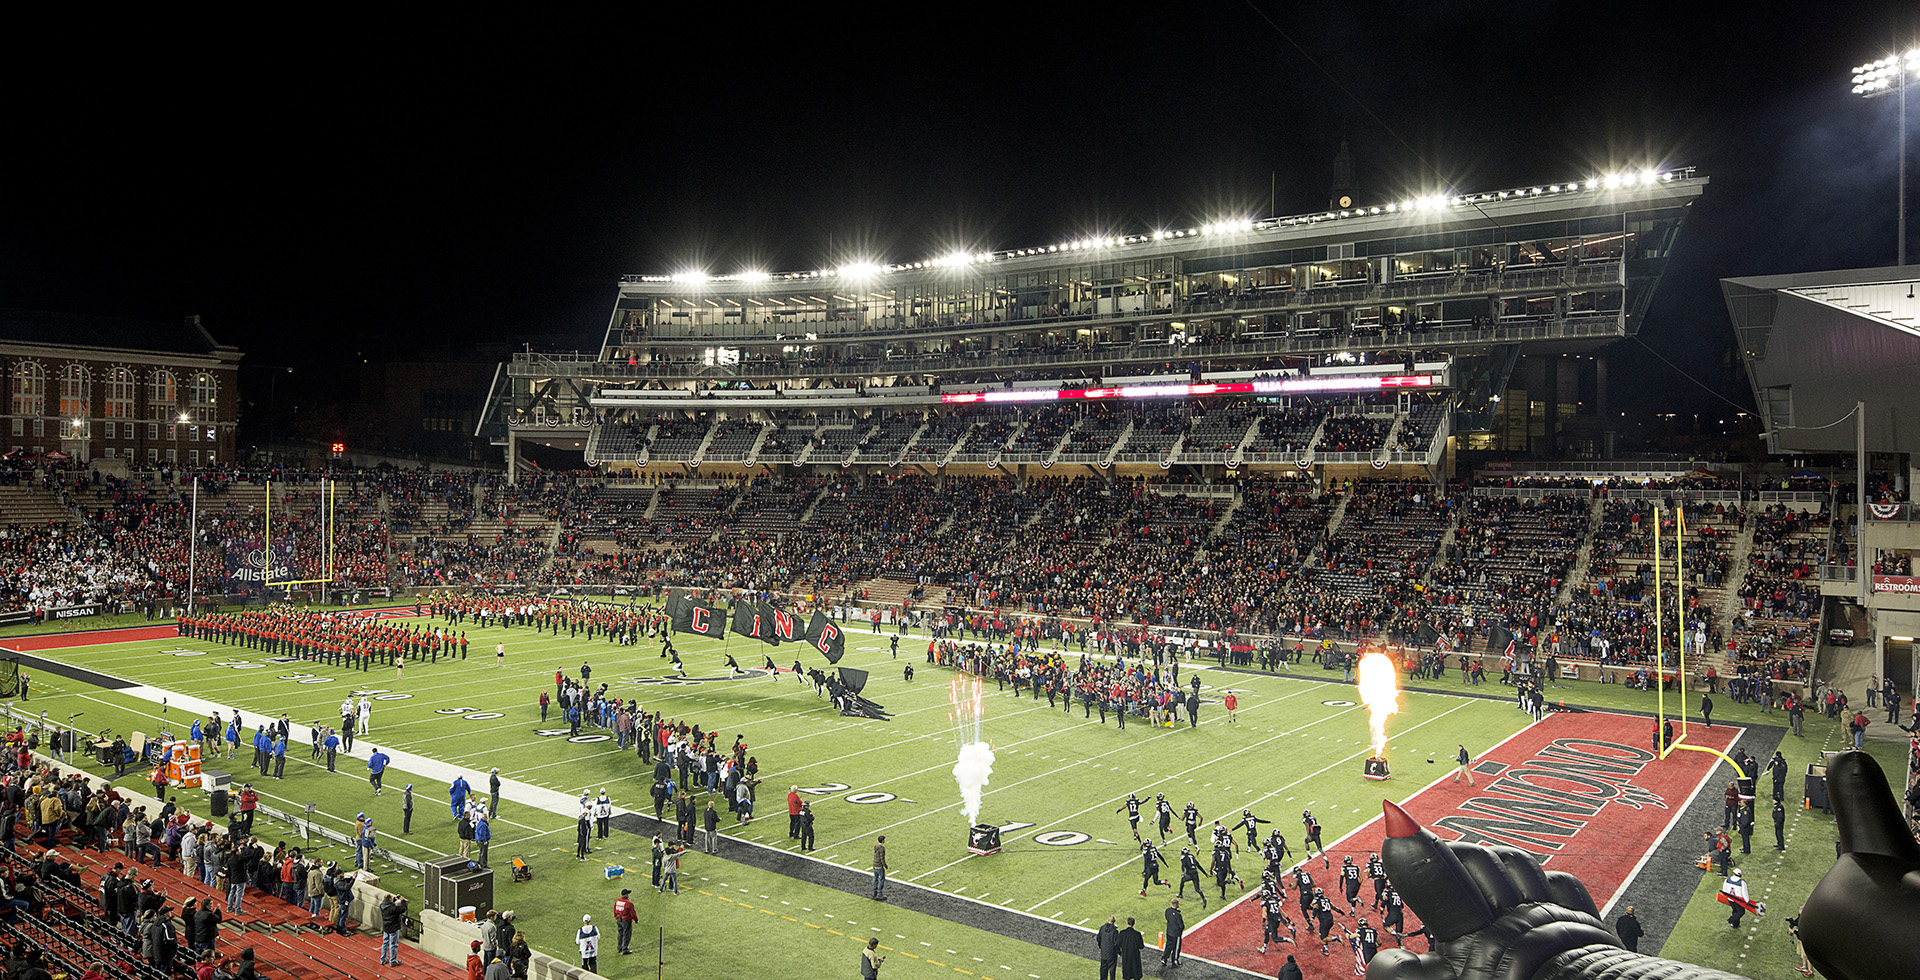 <p>Gameday! Cincinnati Bearcats taking the field with Nippert Stadium filled with cheering fans.</p>
